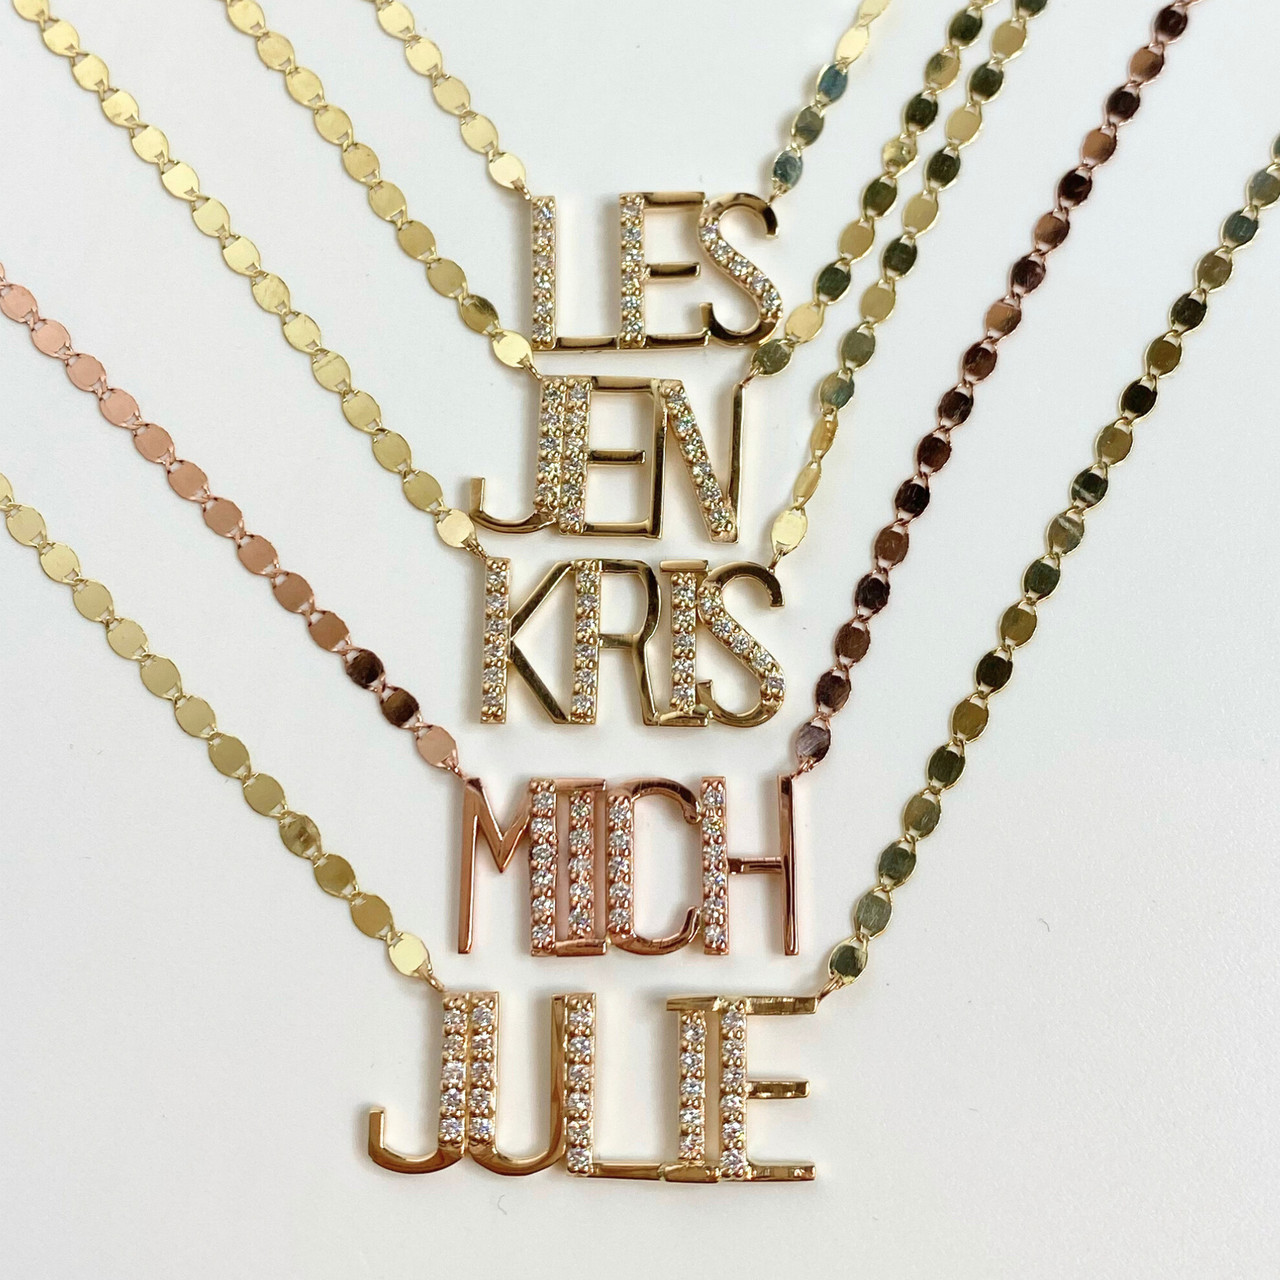 Personalized Diamond Nameplate Necklace - 7 Letters - LANA